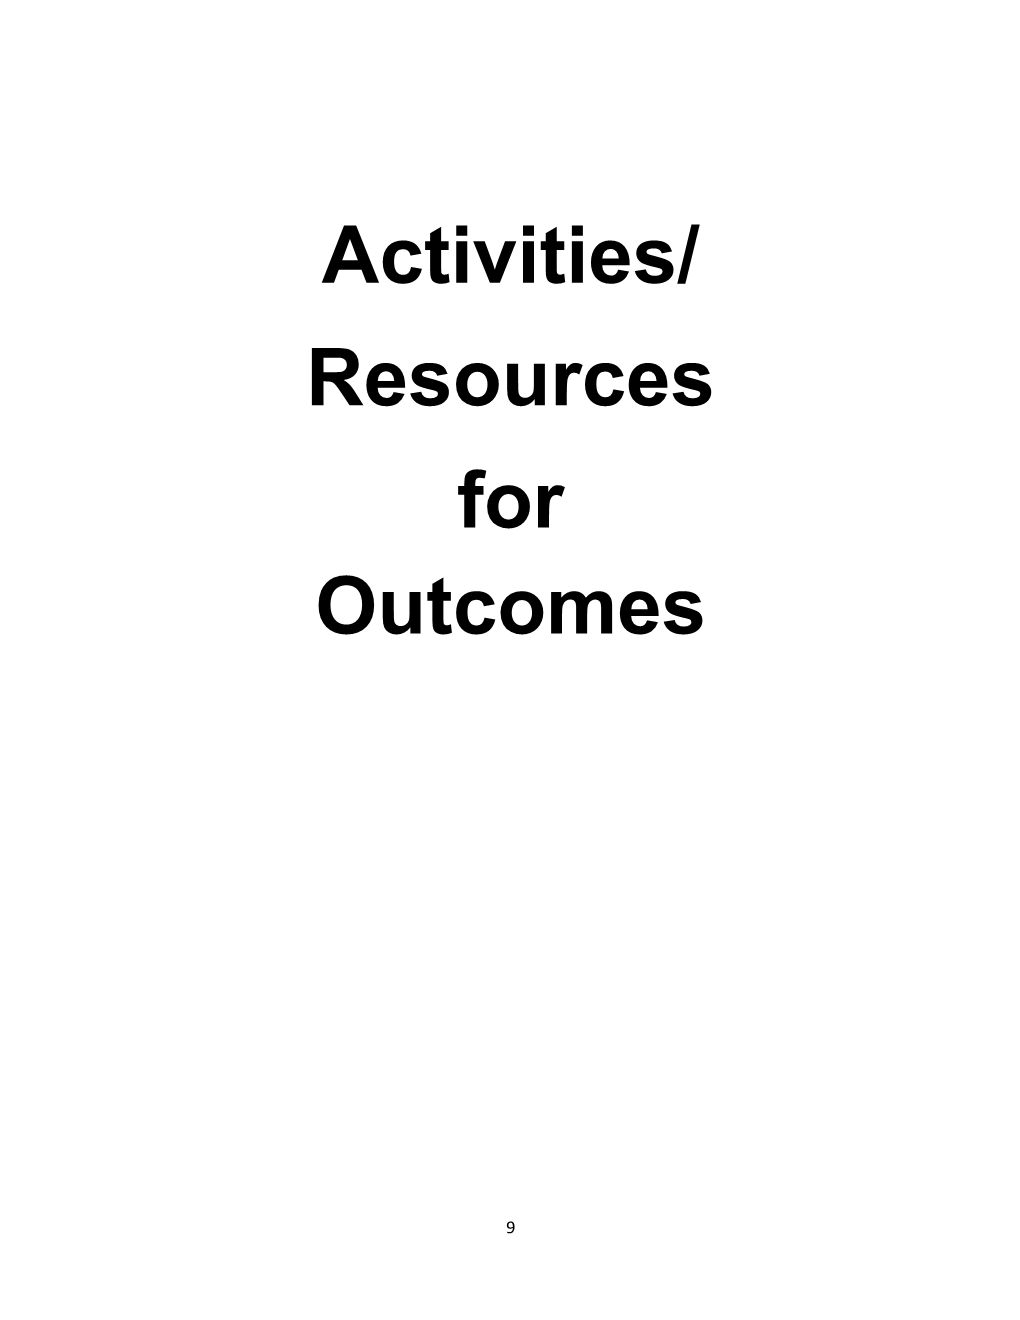 Activities/ Resources for Outcomes